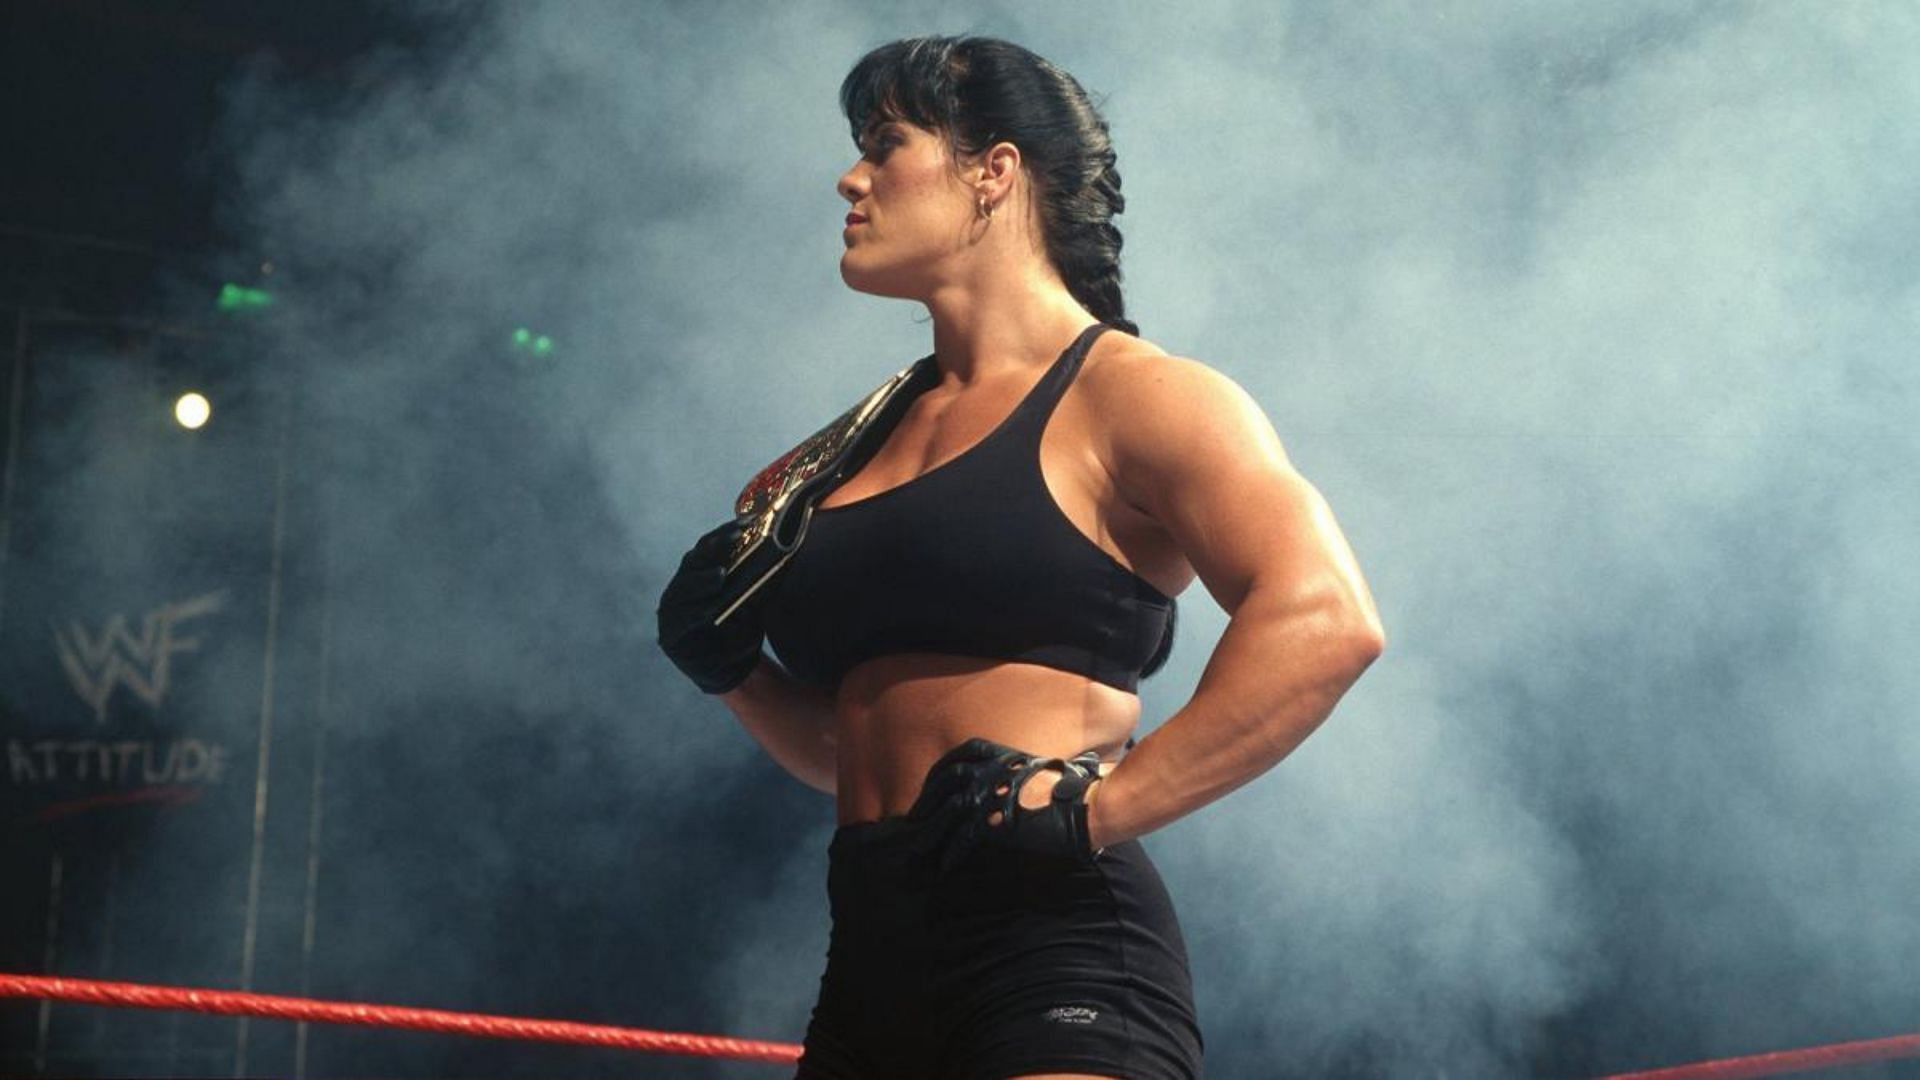 Chyna posthumously joined the WWE Hall of Fame in 2019 as part of D-Generation X